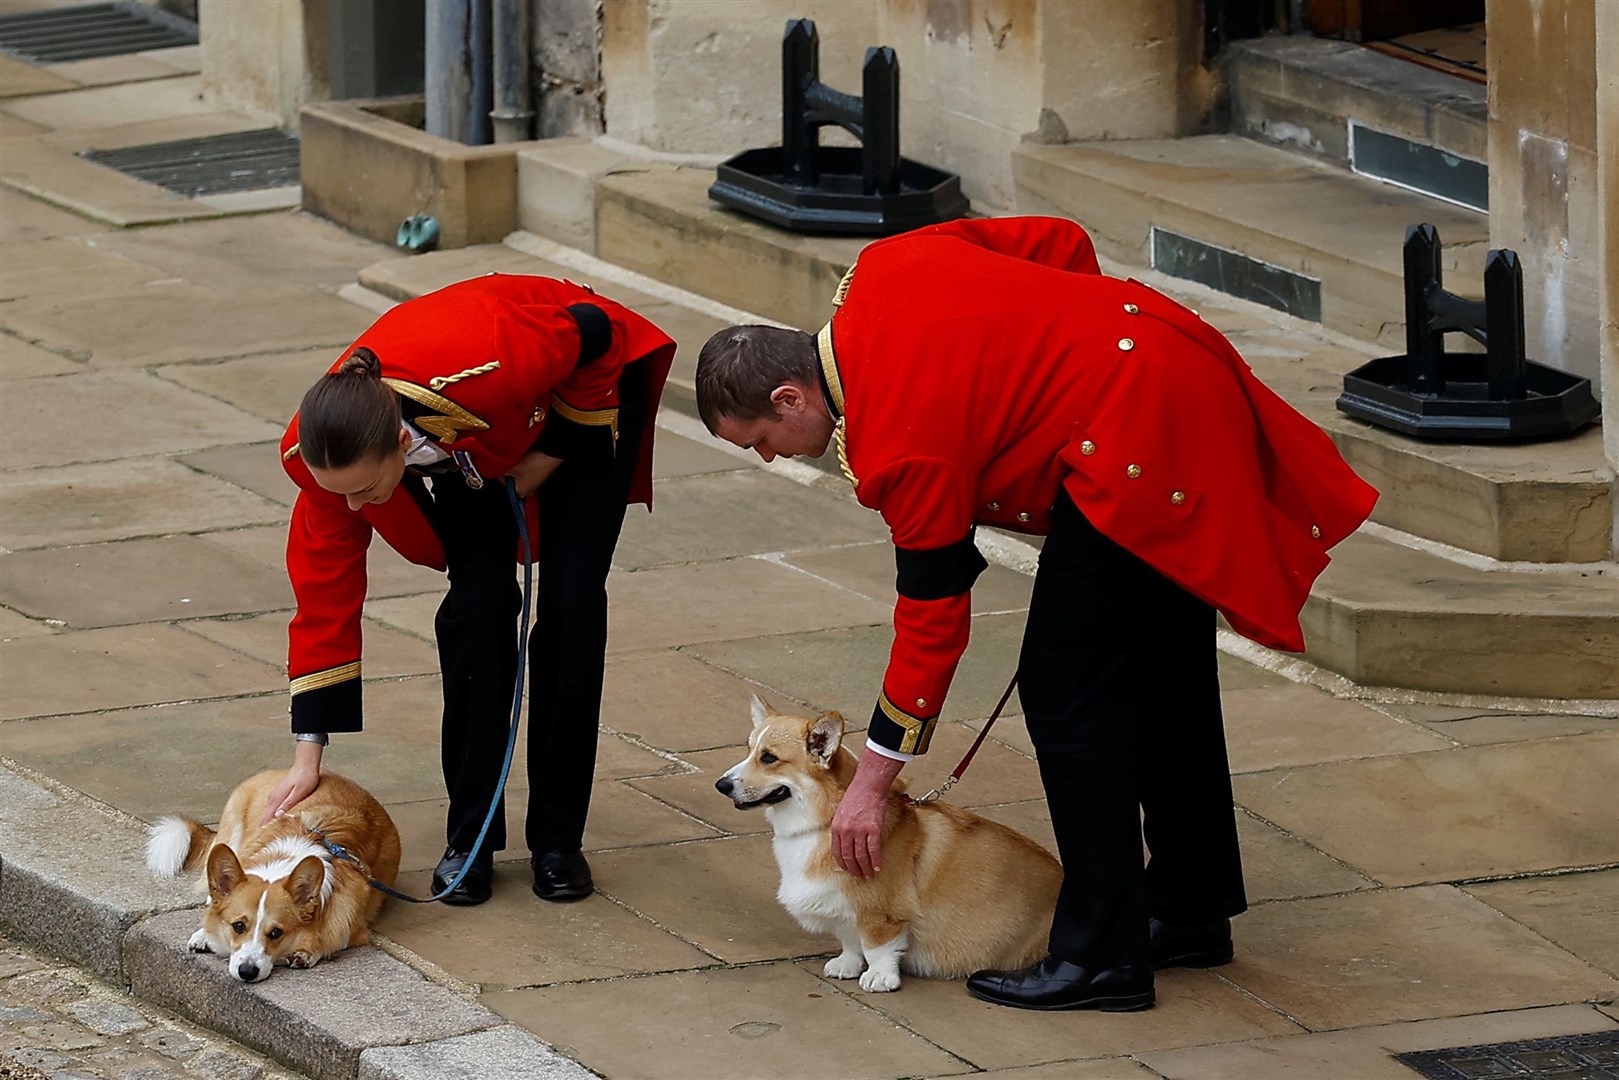 The Queen’s two corgis, Muick and Sandy, were seen during the late monarch’s funeral procession through Windsor Castle. Peter Nicholls/PA